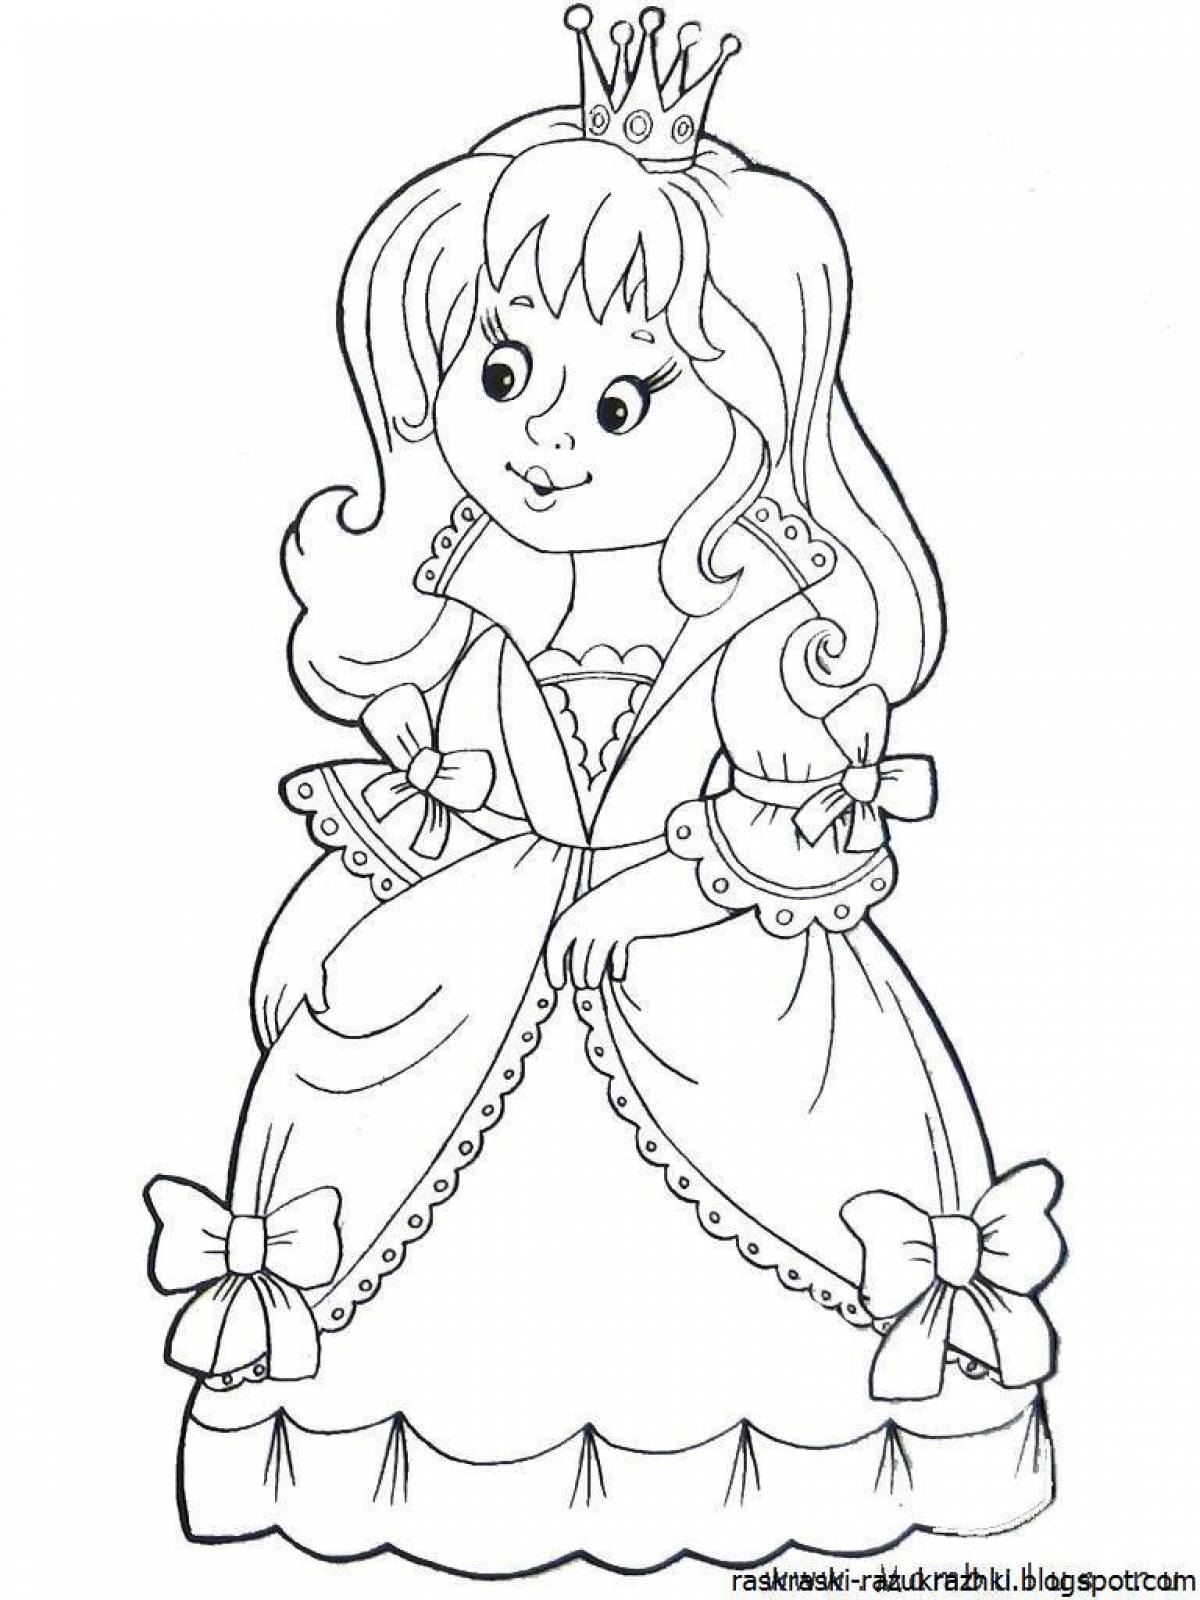 Amazing princess coloring pages for kids